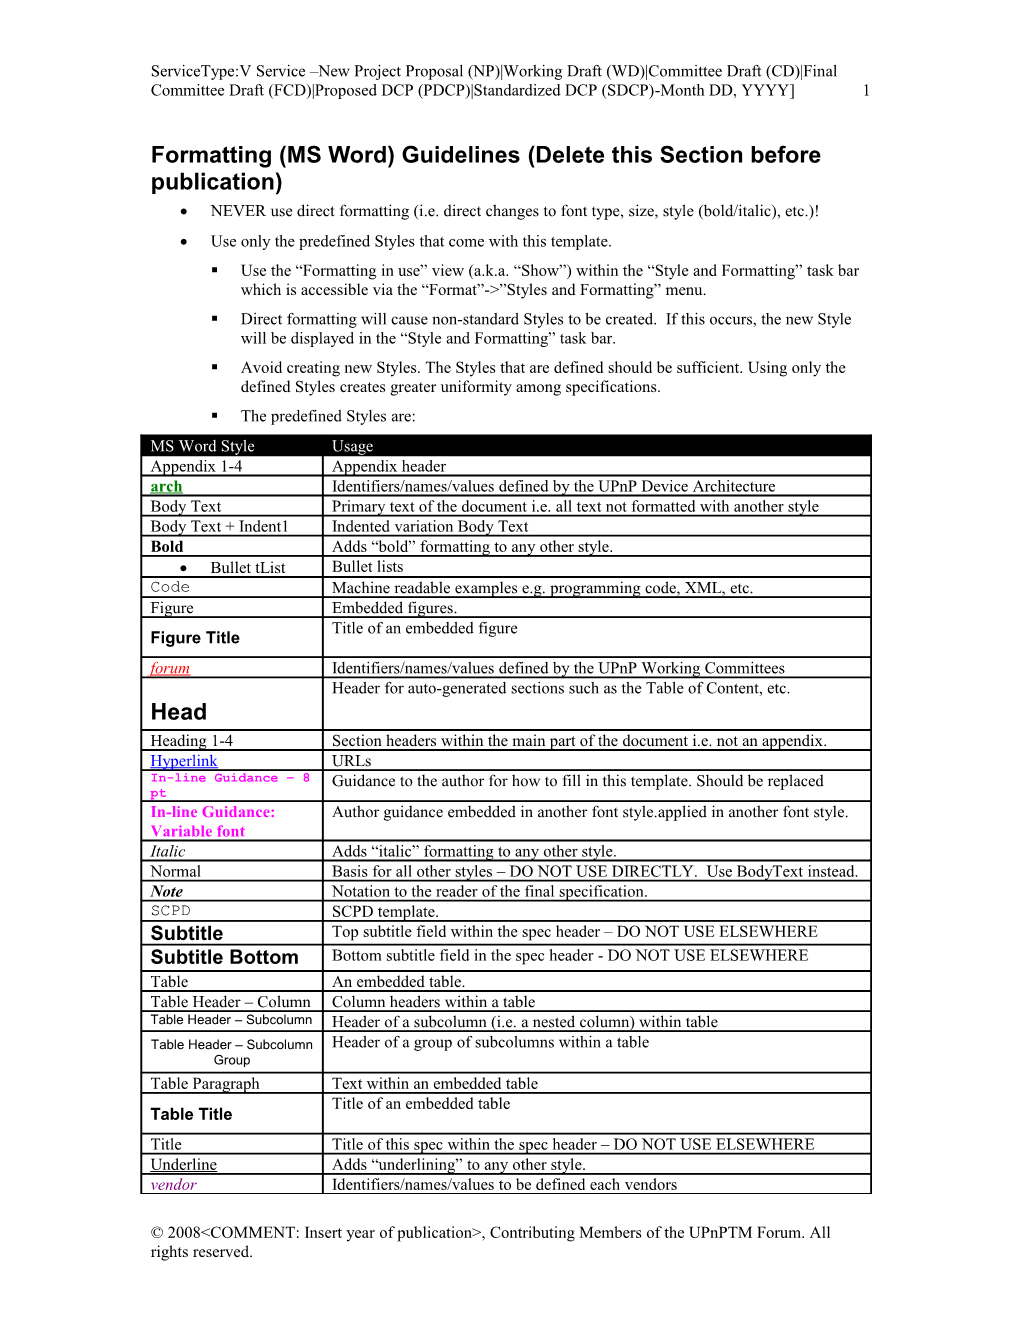 Formatting (MS Word) Guidelines(Delete This Section Before Publication)